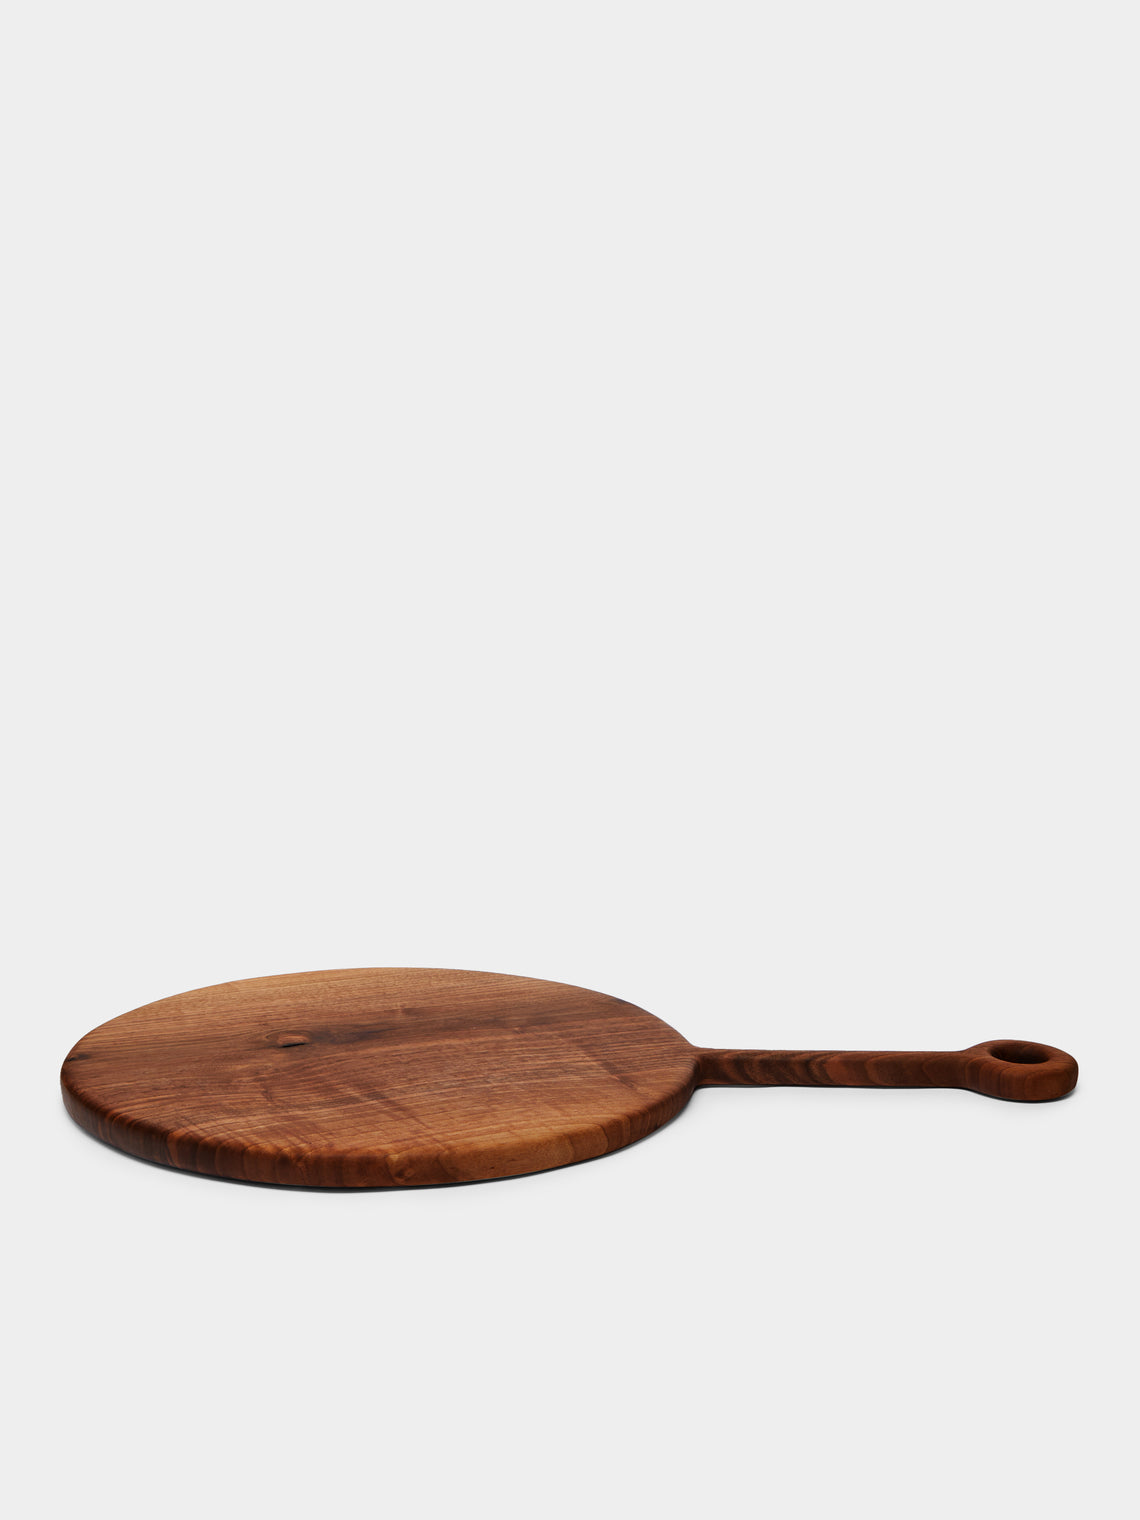 Lucas Castex - No. 1 Hand-Carved Oiled Walnut Serving Board -  - ABASK